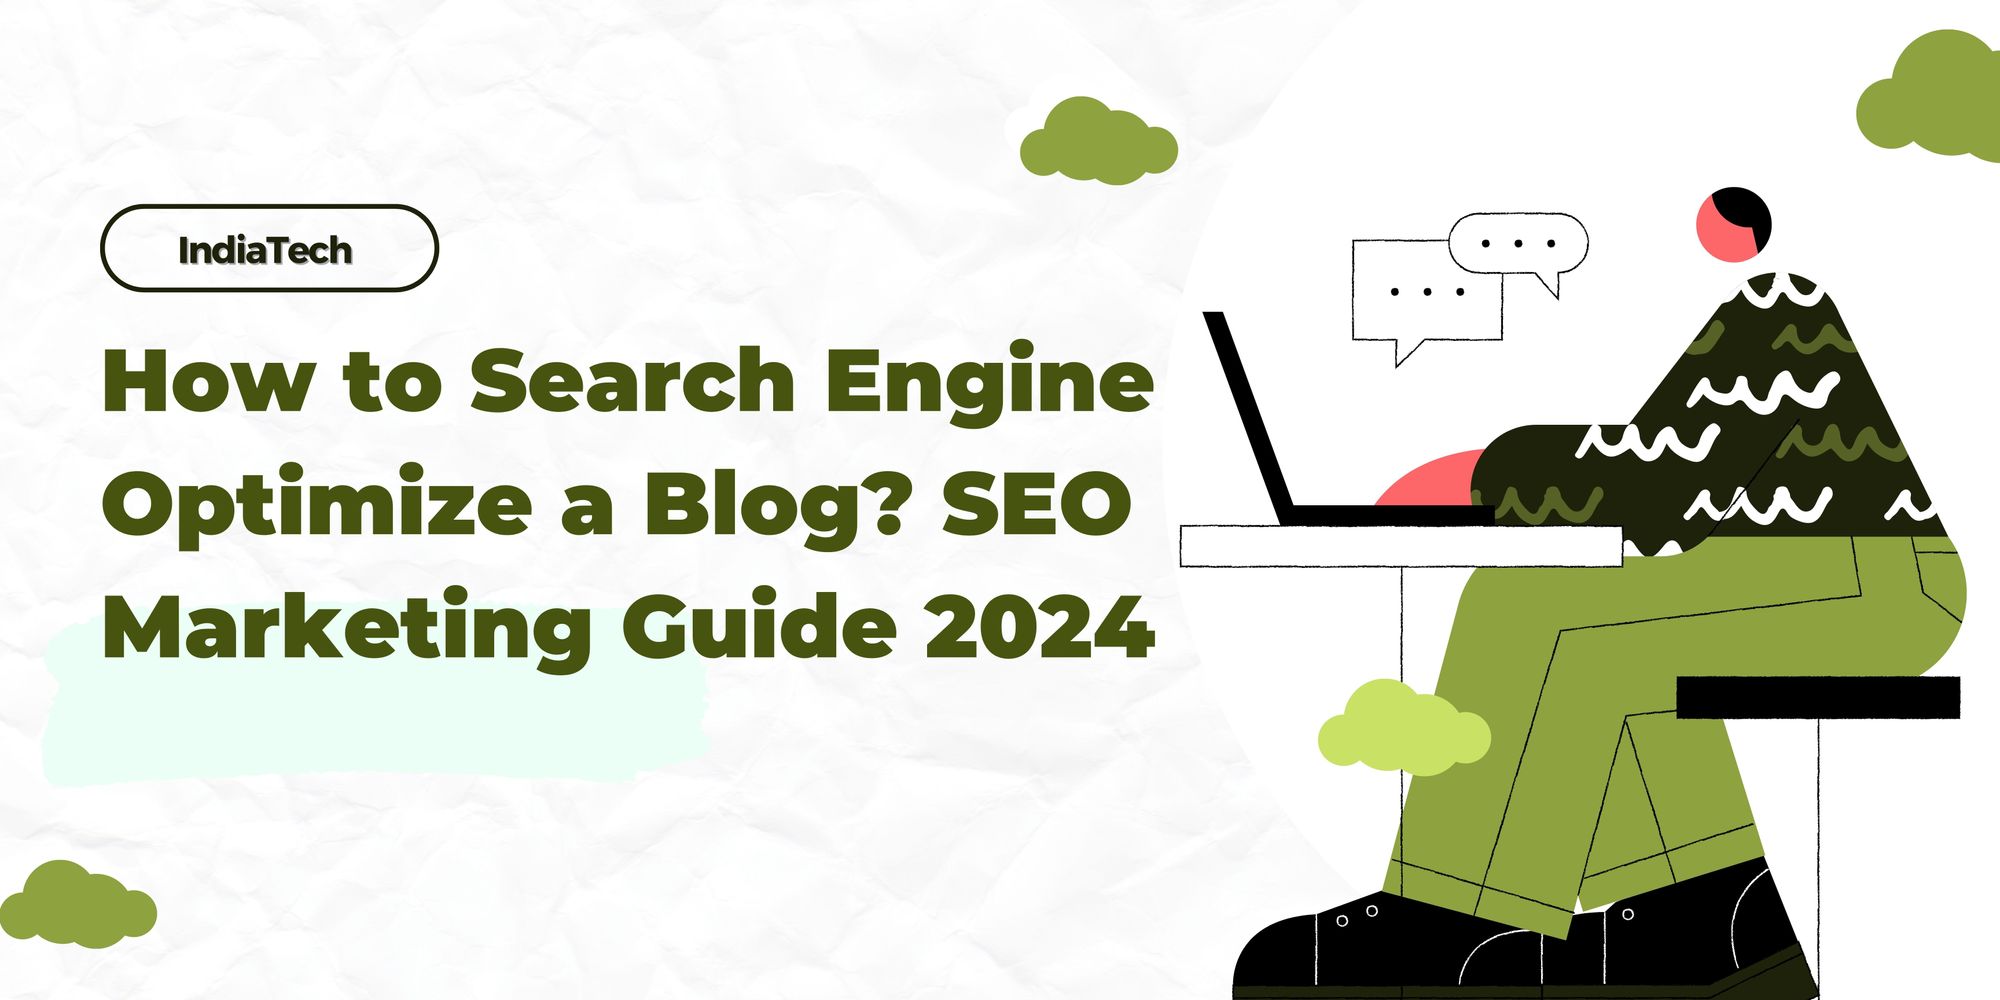 How to Search Engine Optimize a Blog? SEO Marketing Guide 2024